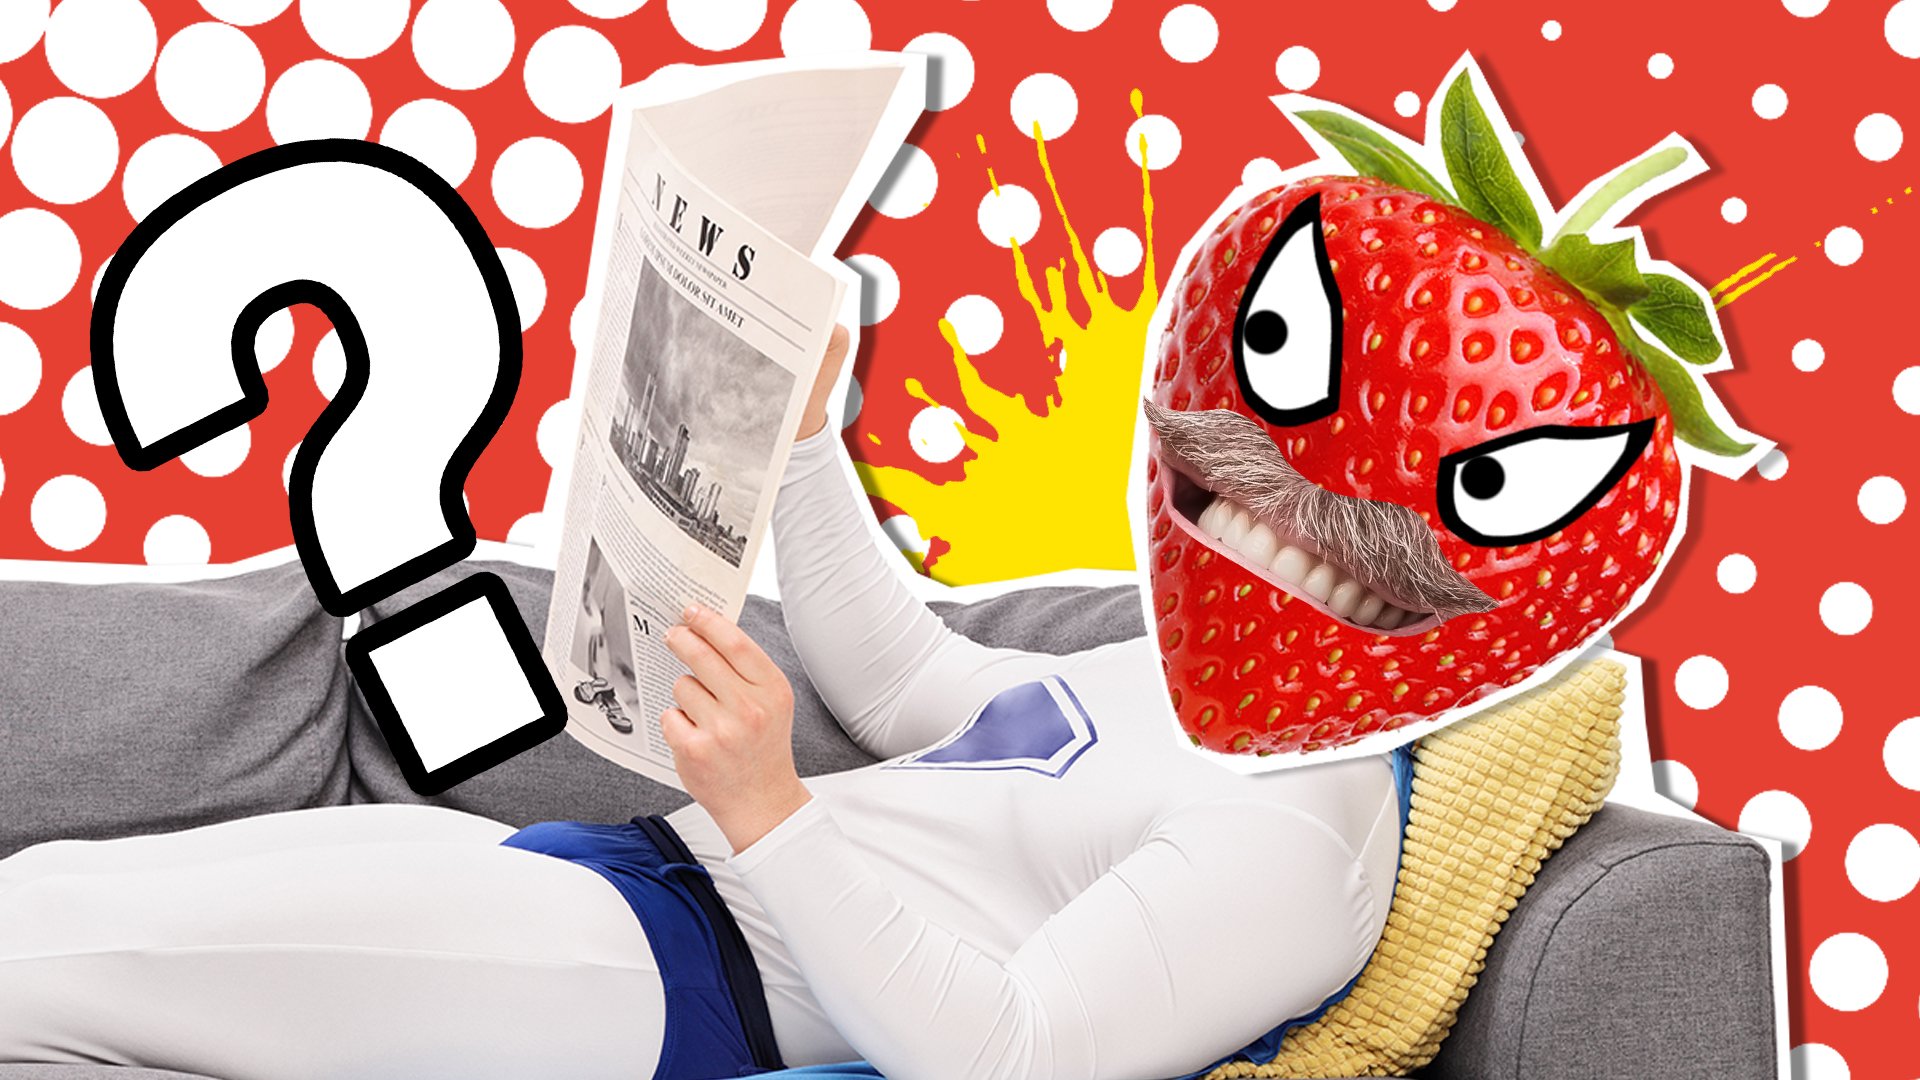 A strawberry made to look like Spider-Man, reading the paper on the sofa